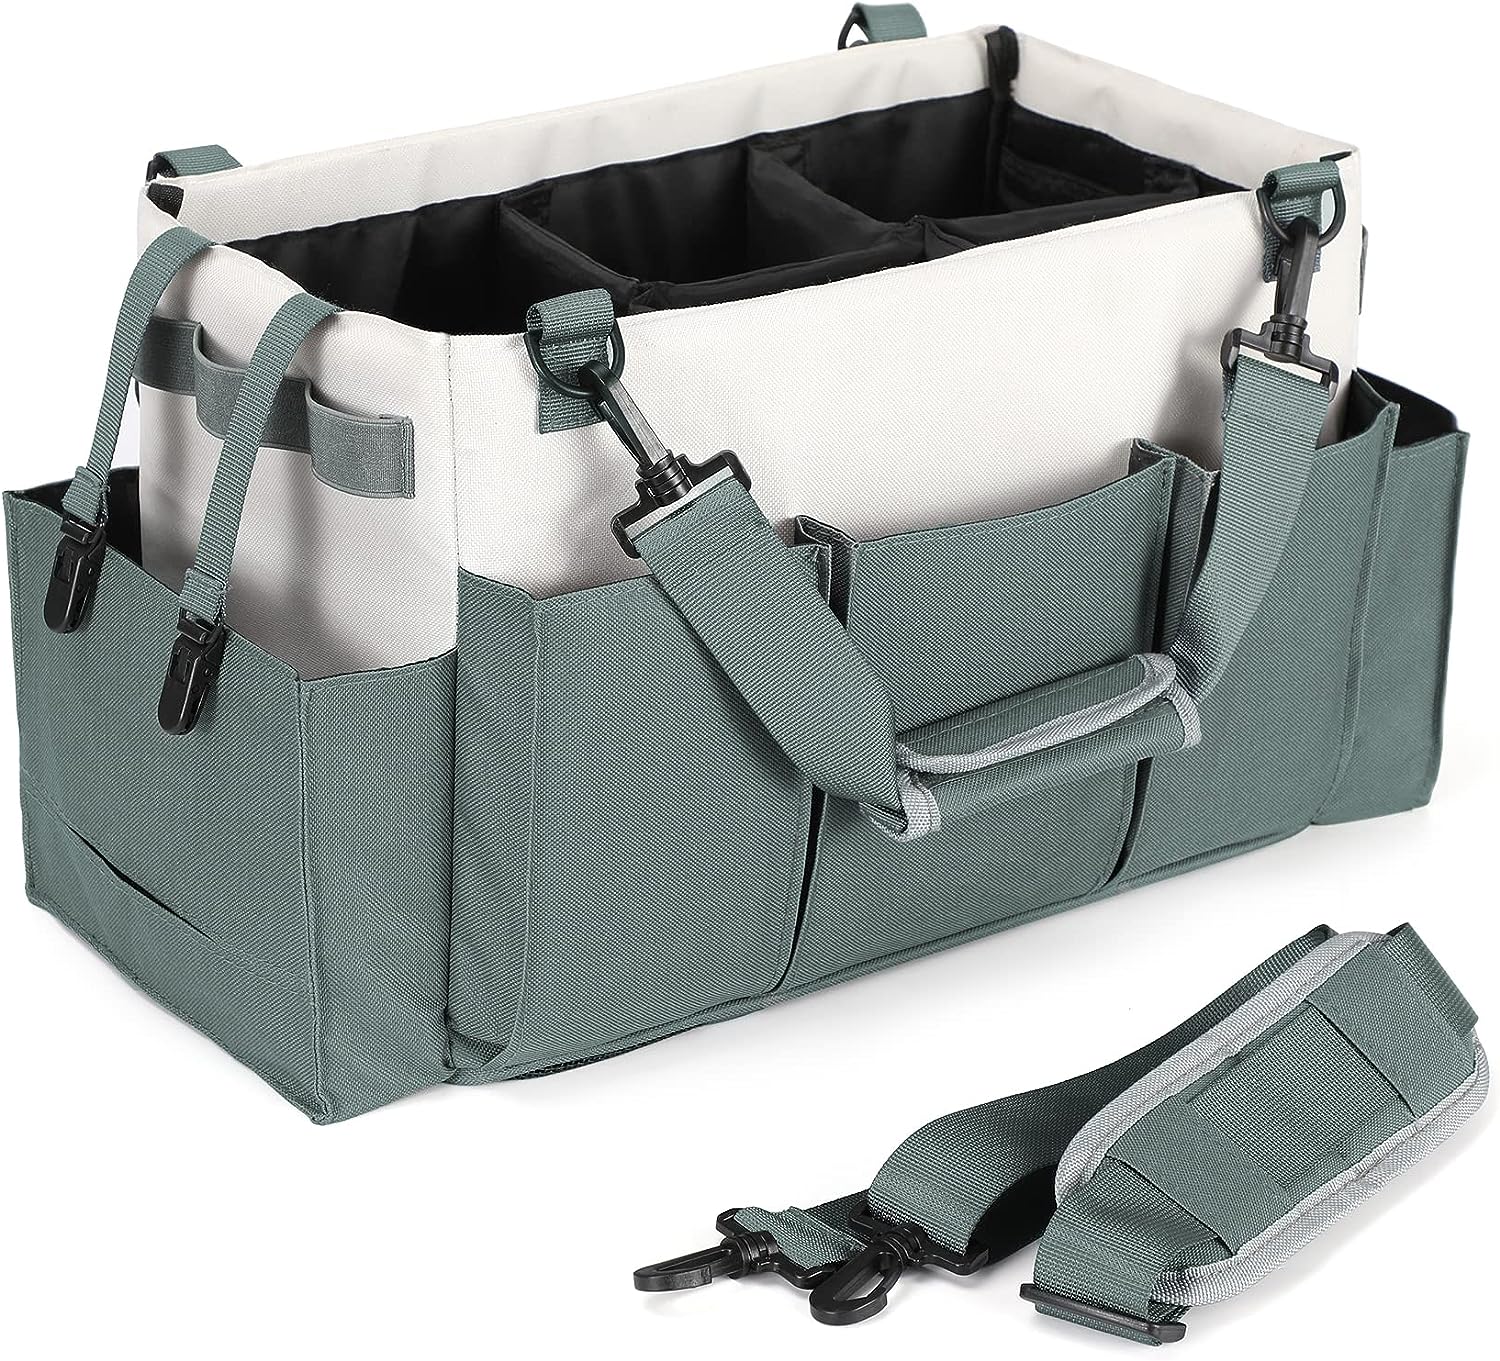 Extra Large (5 Gallon) Divided/Compartment Cleaning Utility Caddy Tote —  Joey'z Shopping